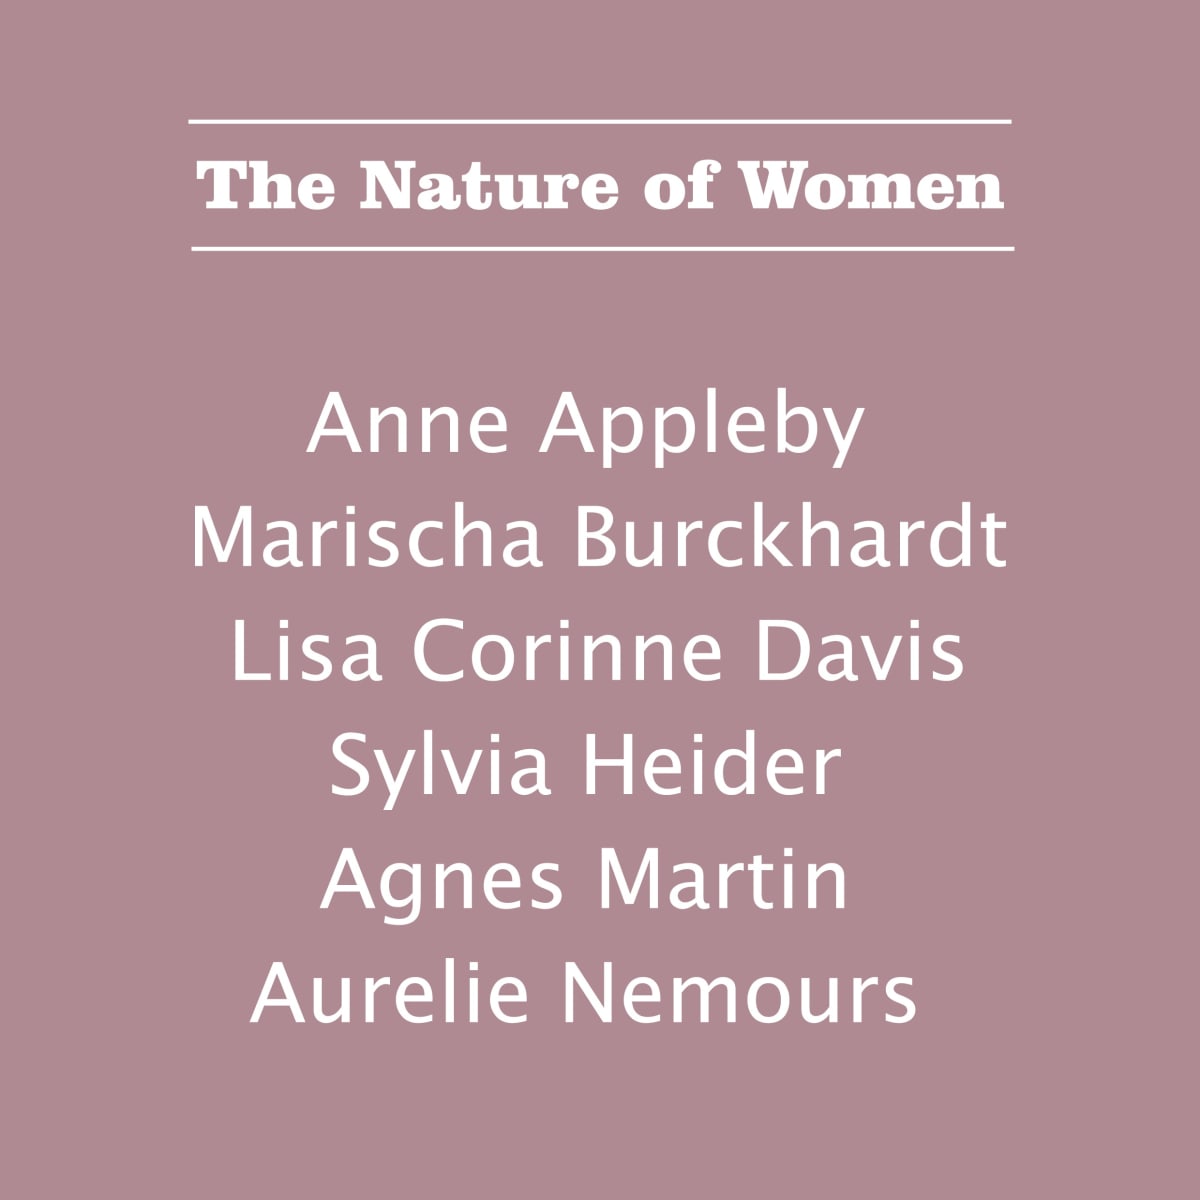 THE NATURE OF WOMEN